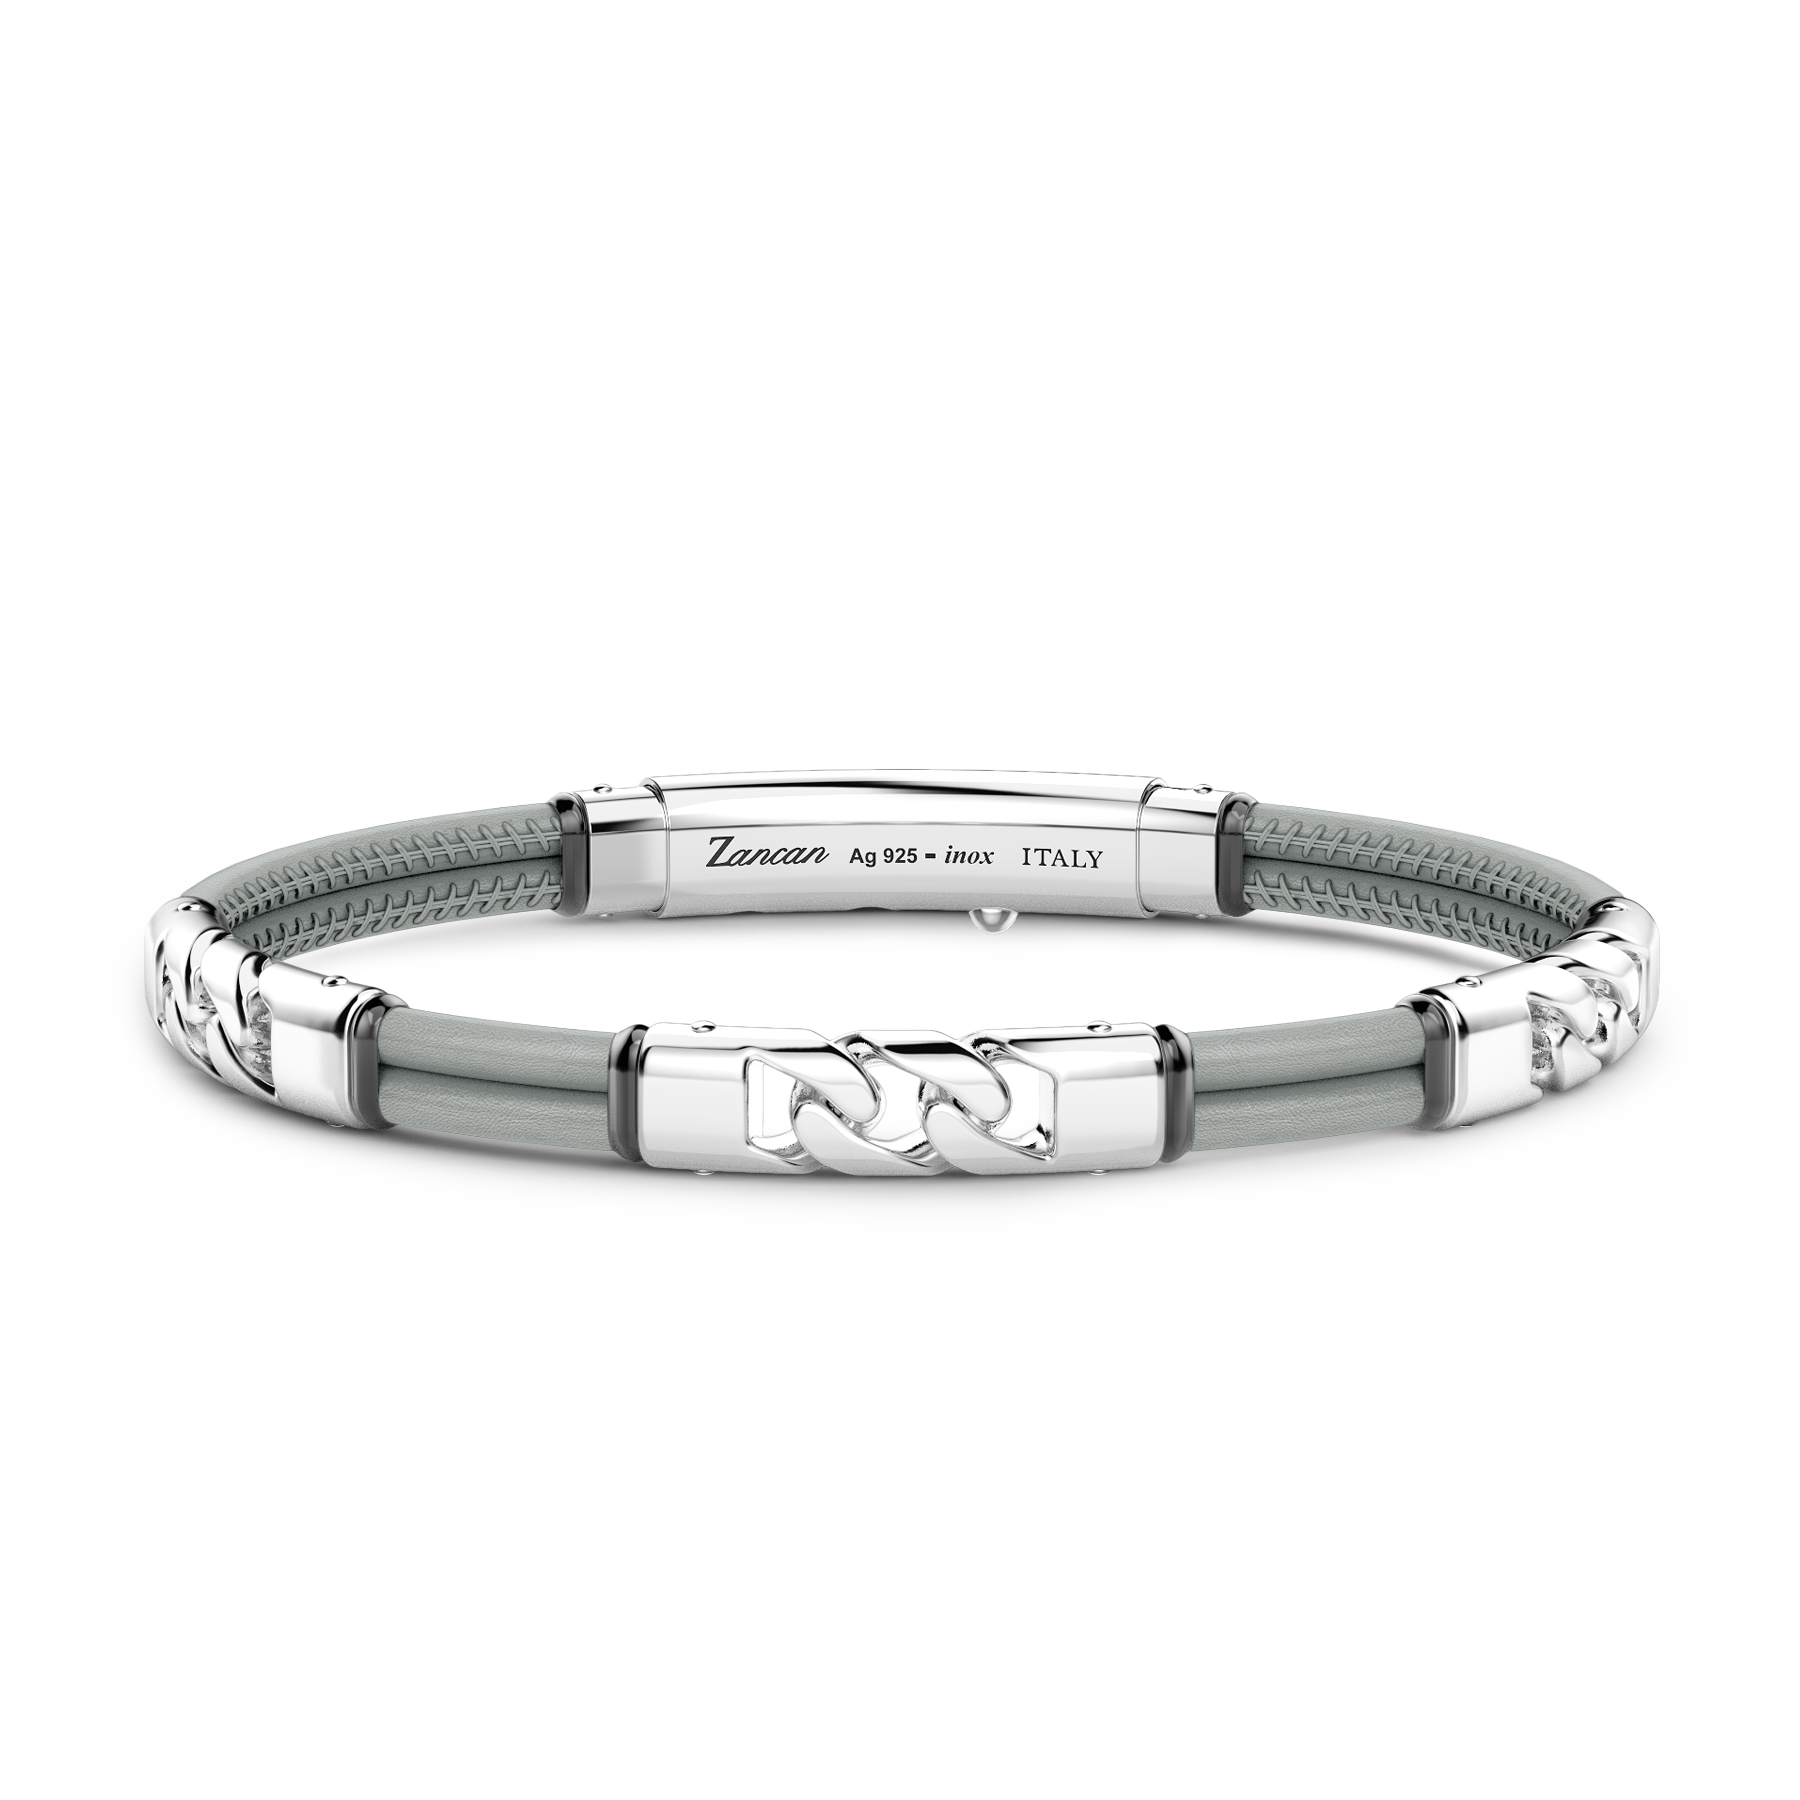 Upgrade your wrist game with the Zancan Sterling Silver Gray Leather Bracelet. Made in Italy with rhodium coating for durability, this bracelet features an adjustable clasp and a double row of gray leather for a sleek and stylish look. Sterling silver clasp adds a touch of elegance.